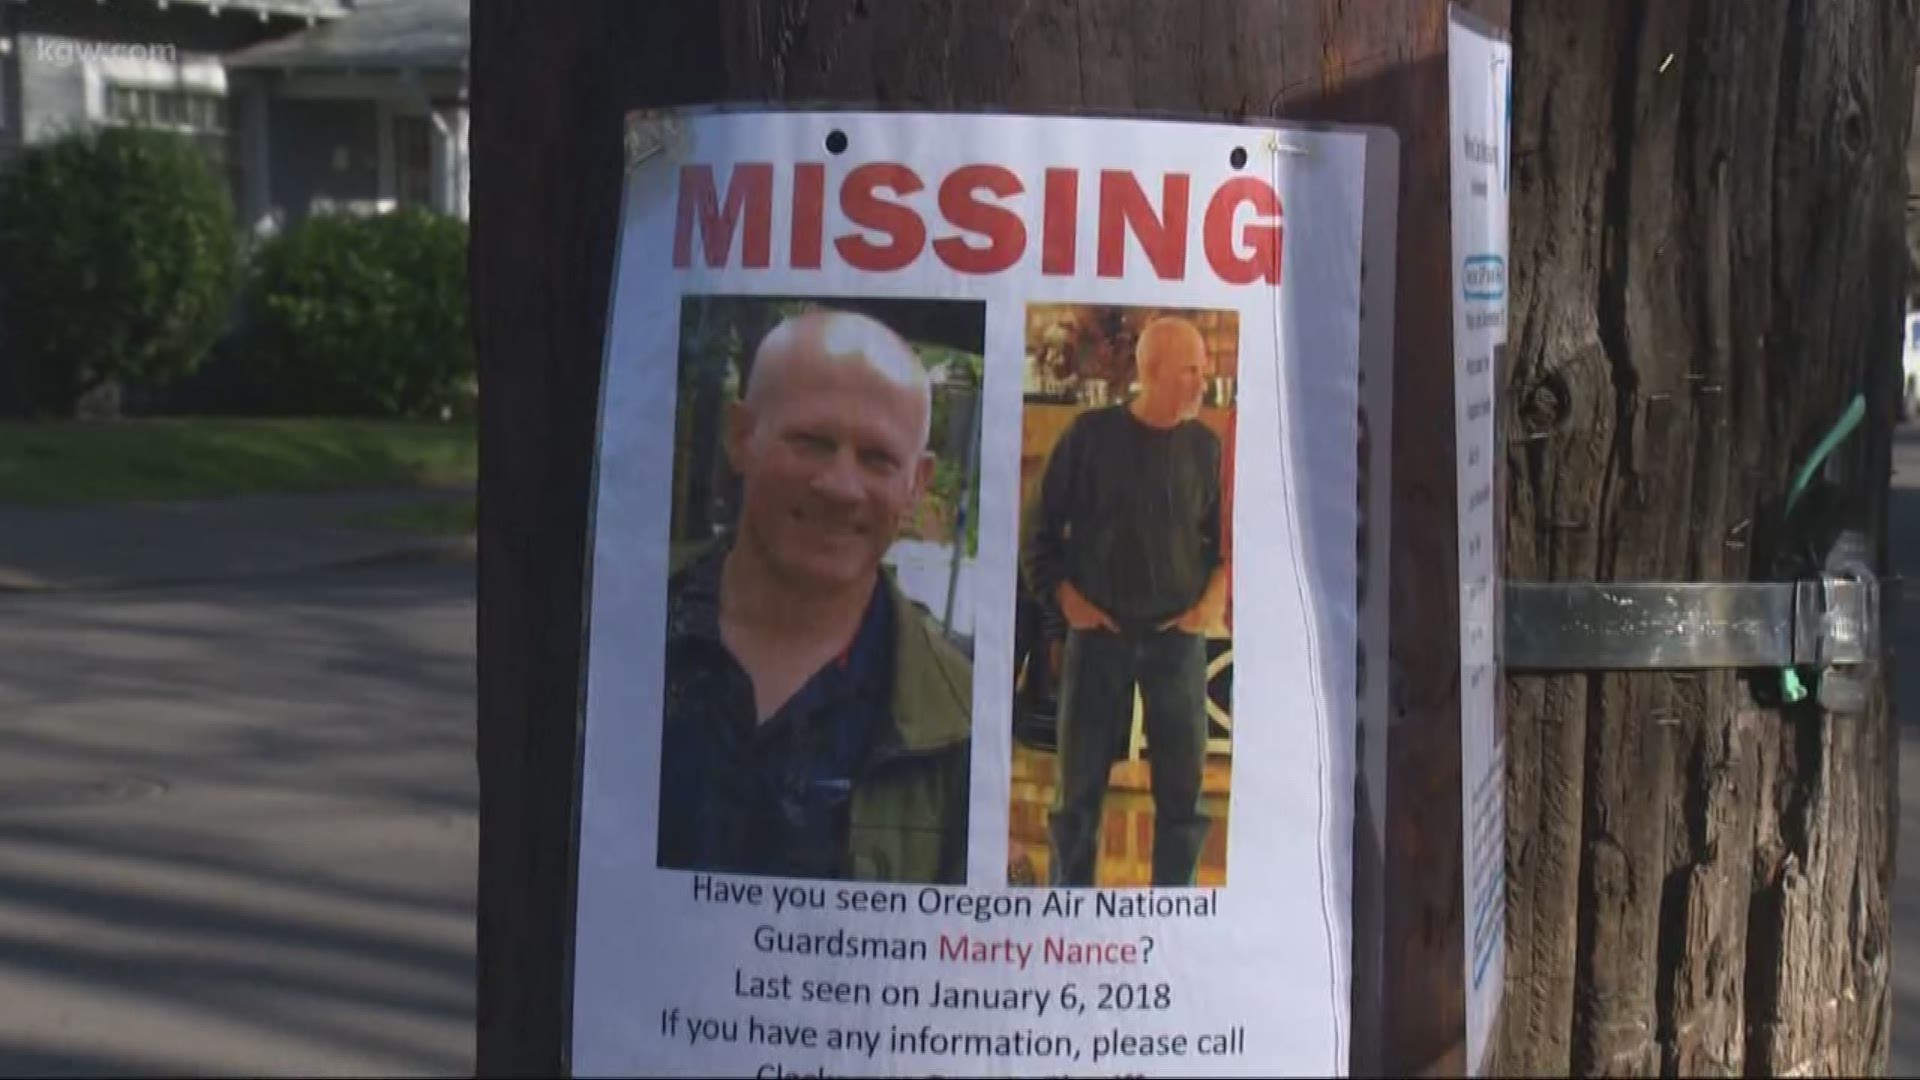  Family and friends aren't giving up in their search for missing Oregon Air National Guardsman Martin Nance.Add to: Search for missing Oregon Air National Guardsman in Clackamas County